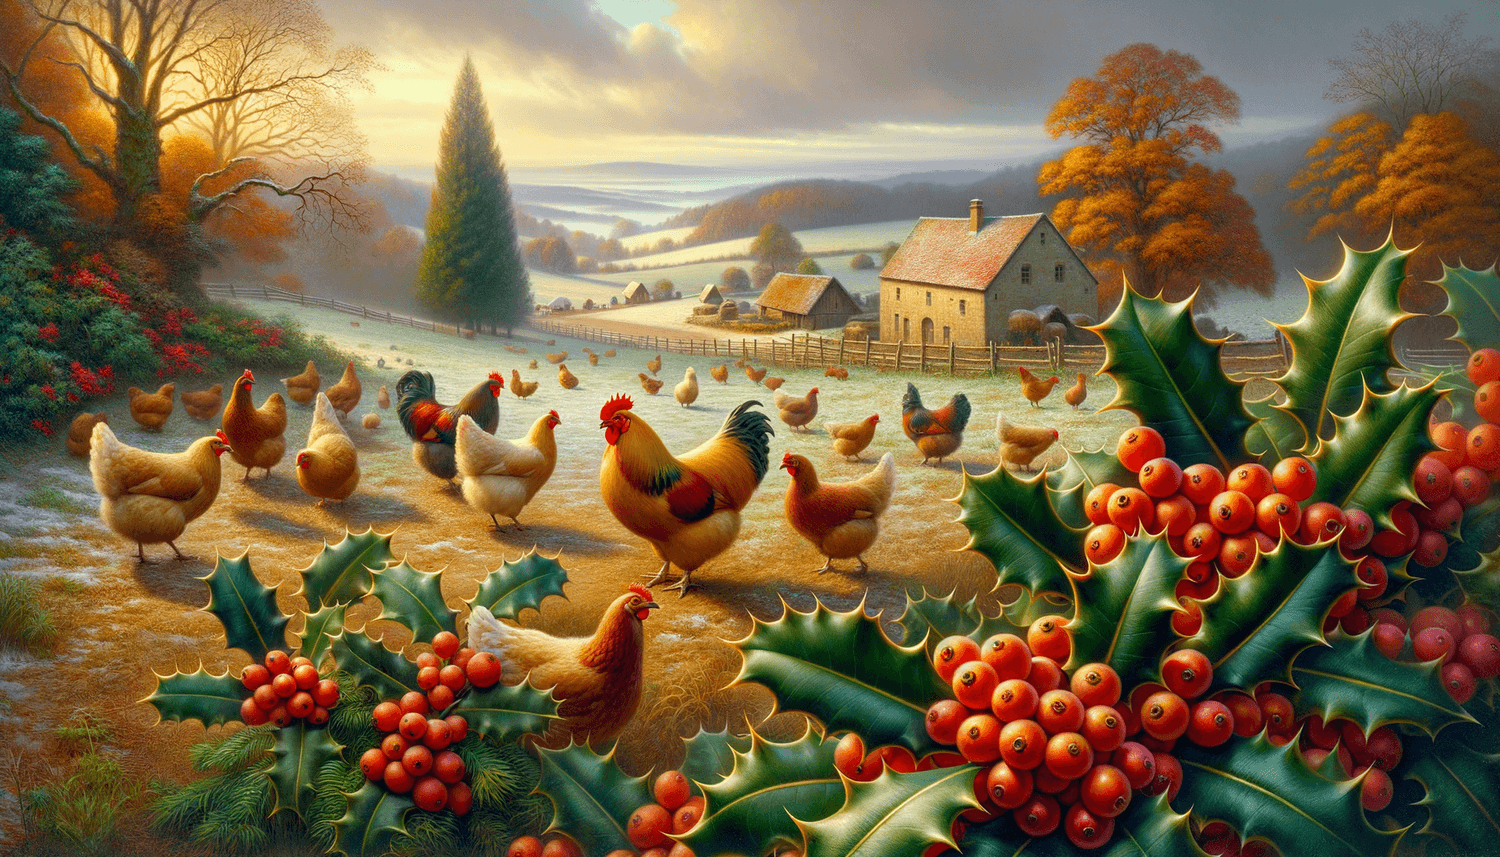 Can Chickens Eat Holly Berries?